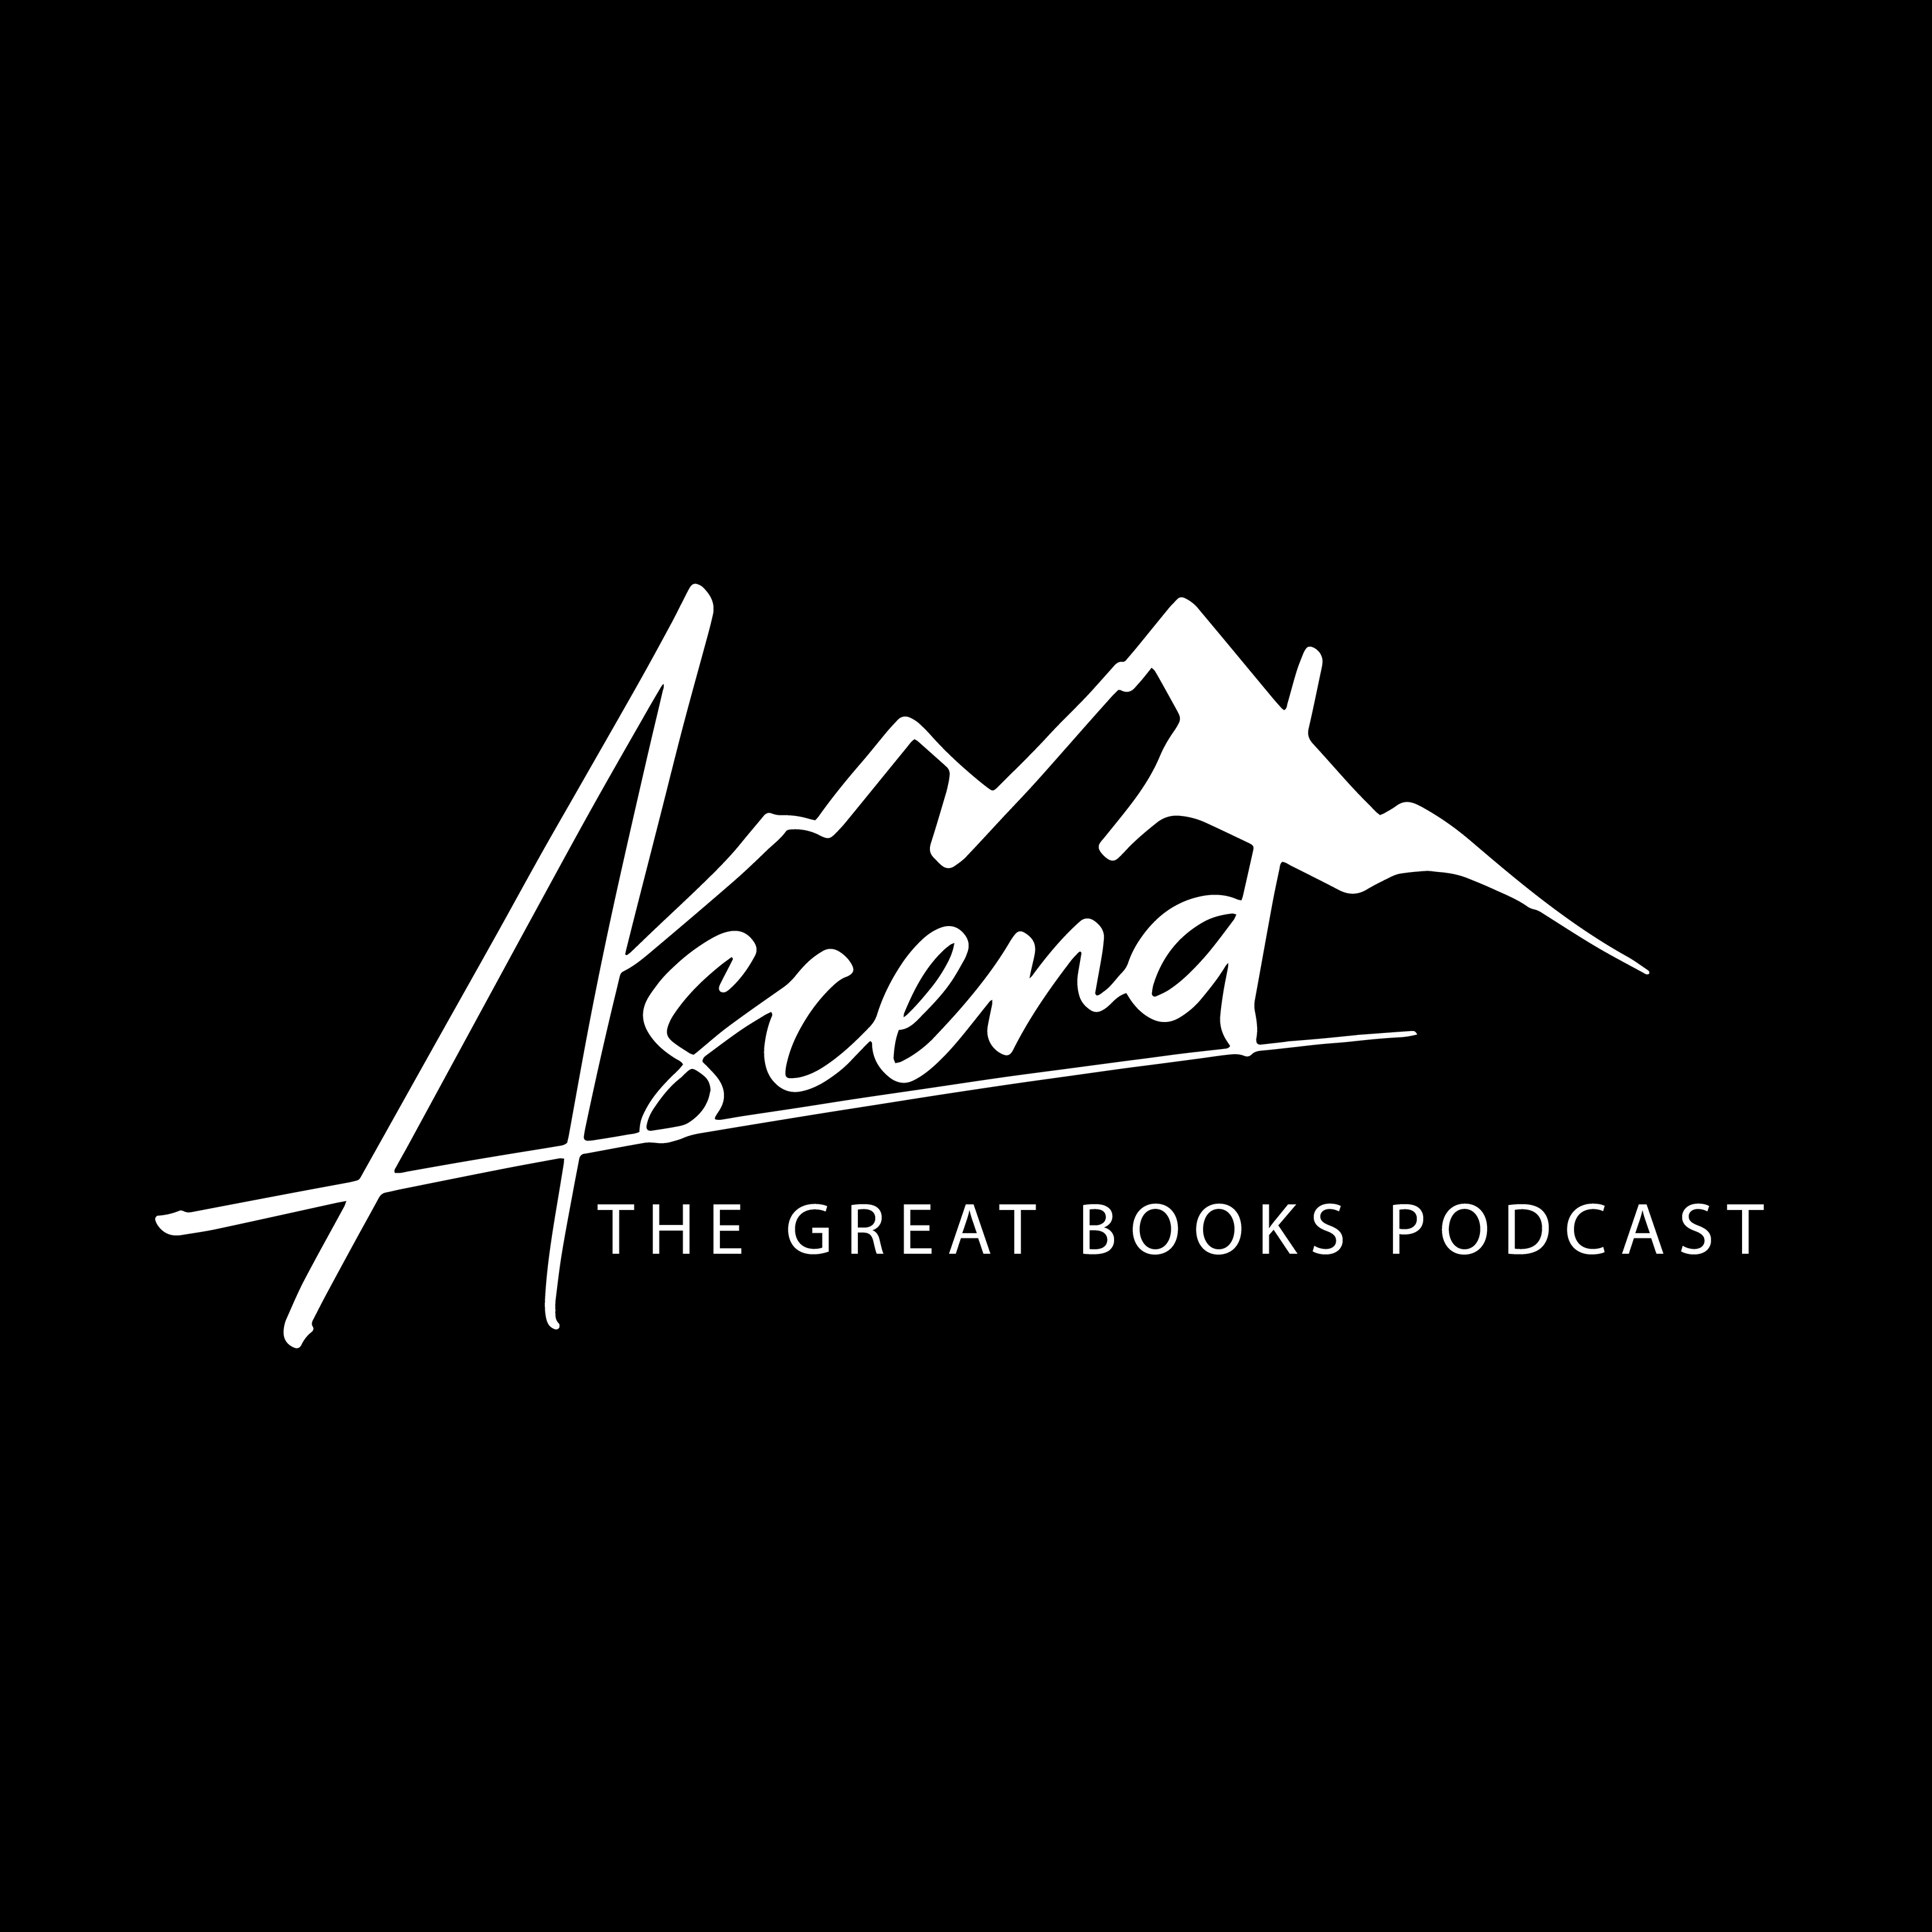 Artwork for Ascend - The Great Books Podcast